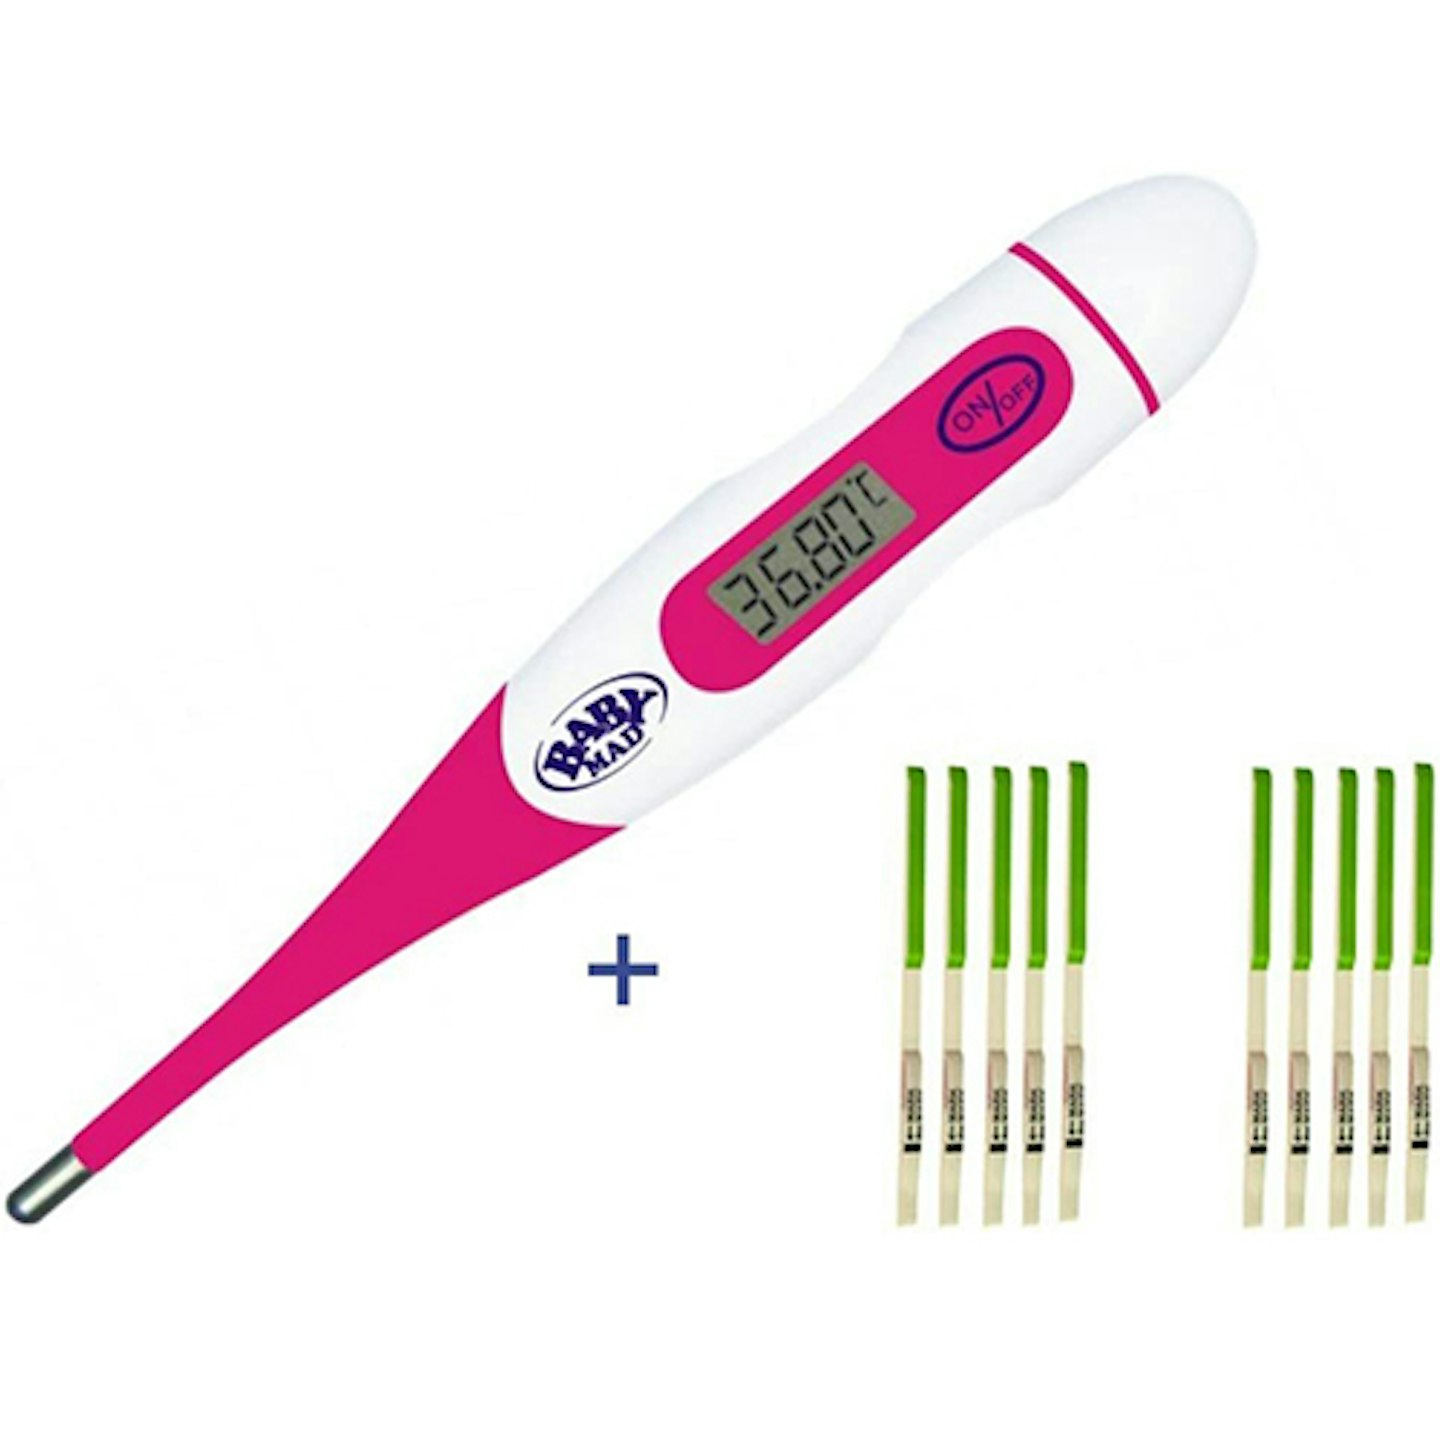 BabyMad Basal Thermometer and 30 x Ovulation Tests